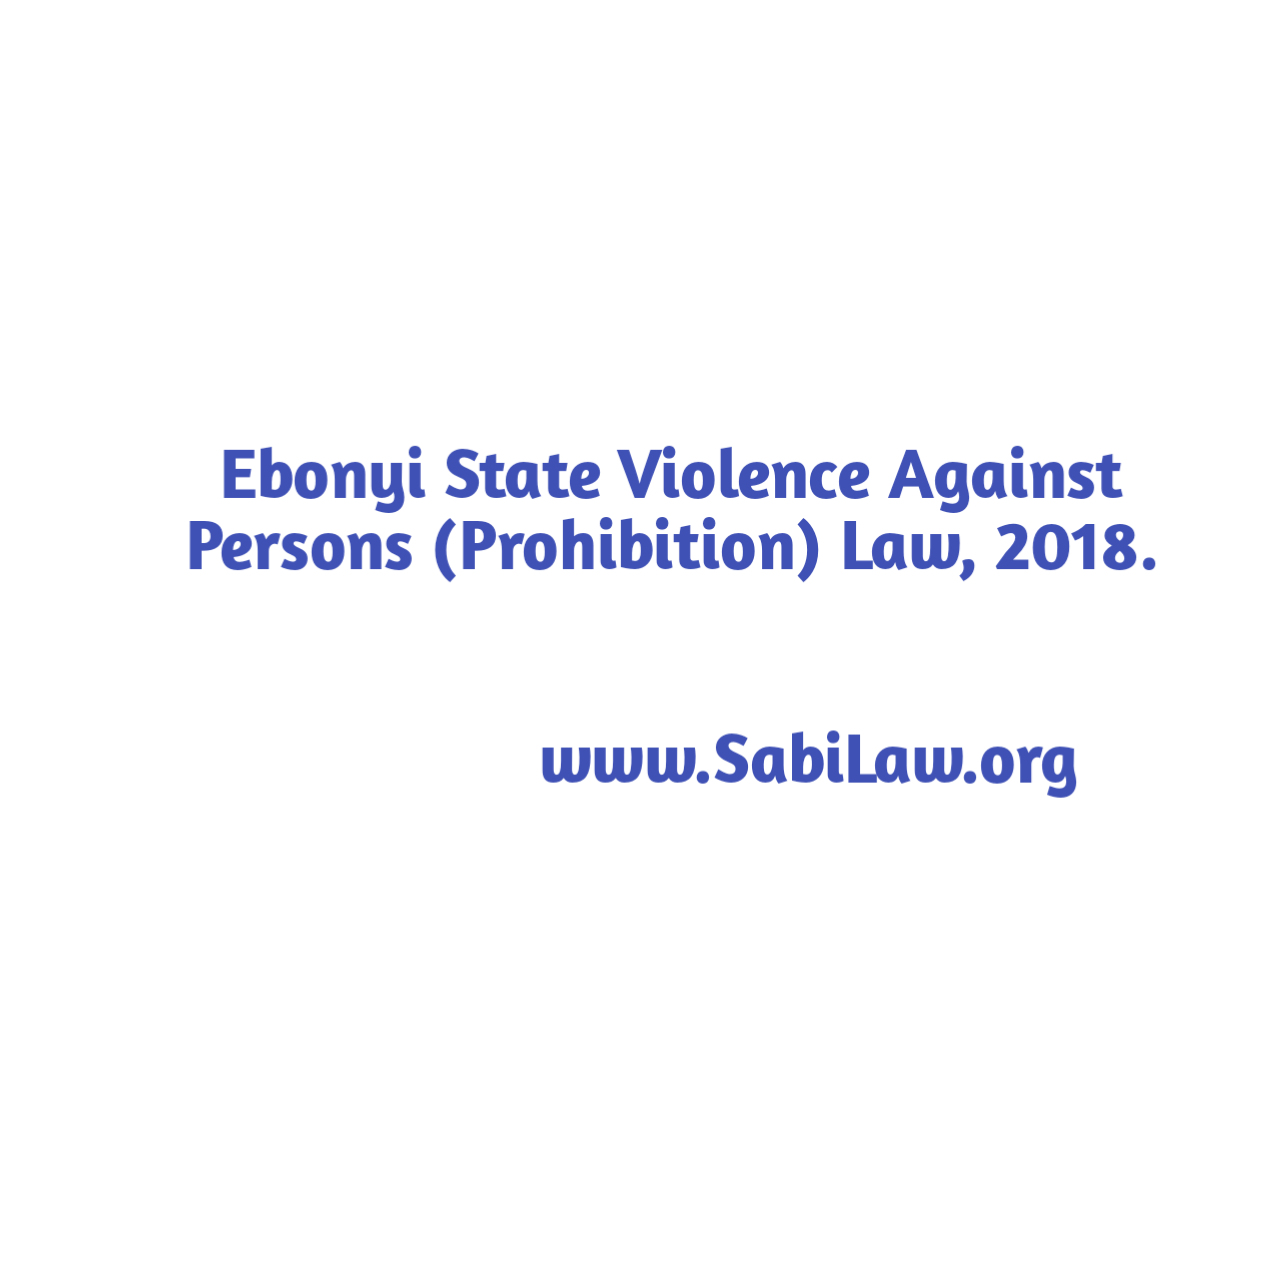 Copy of the Ebonyi State Violence Against Persons (Prohibition) Law, 2018